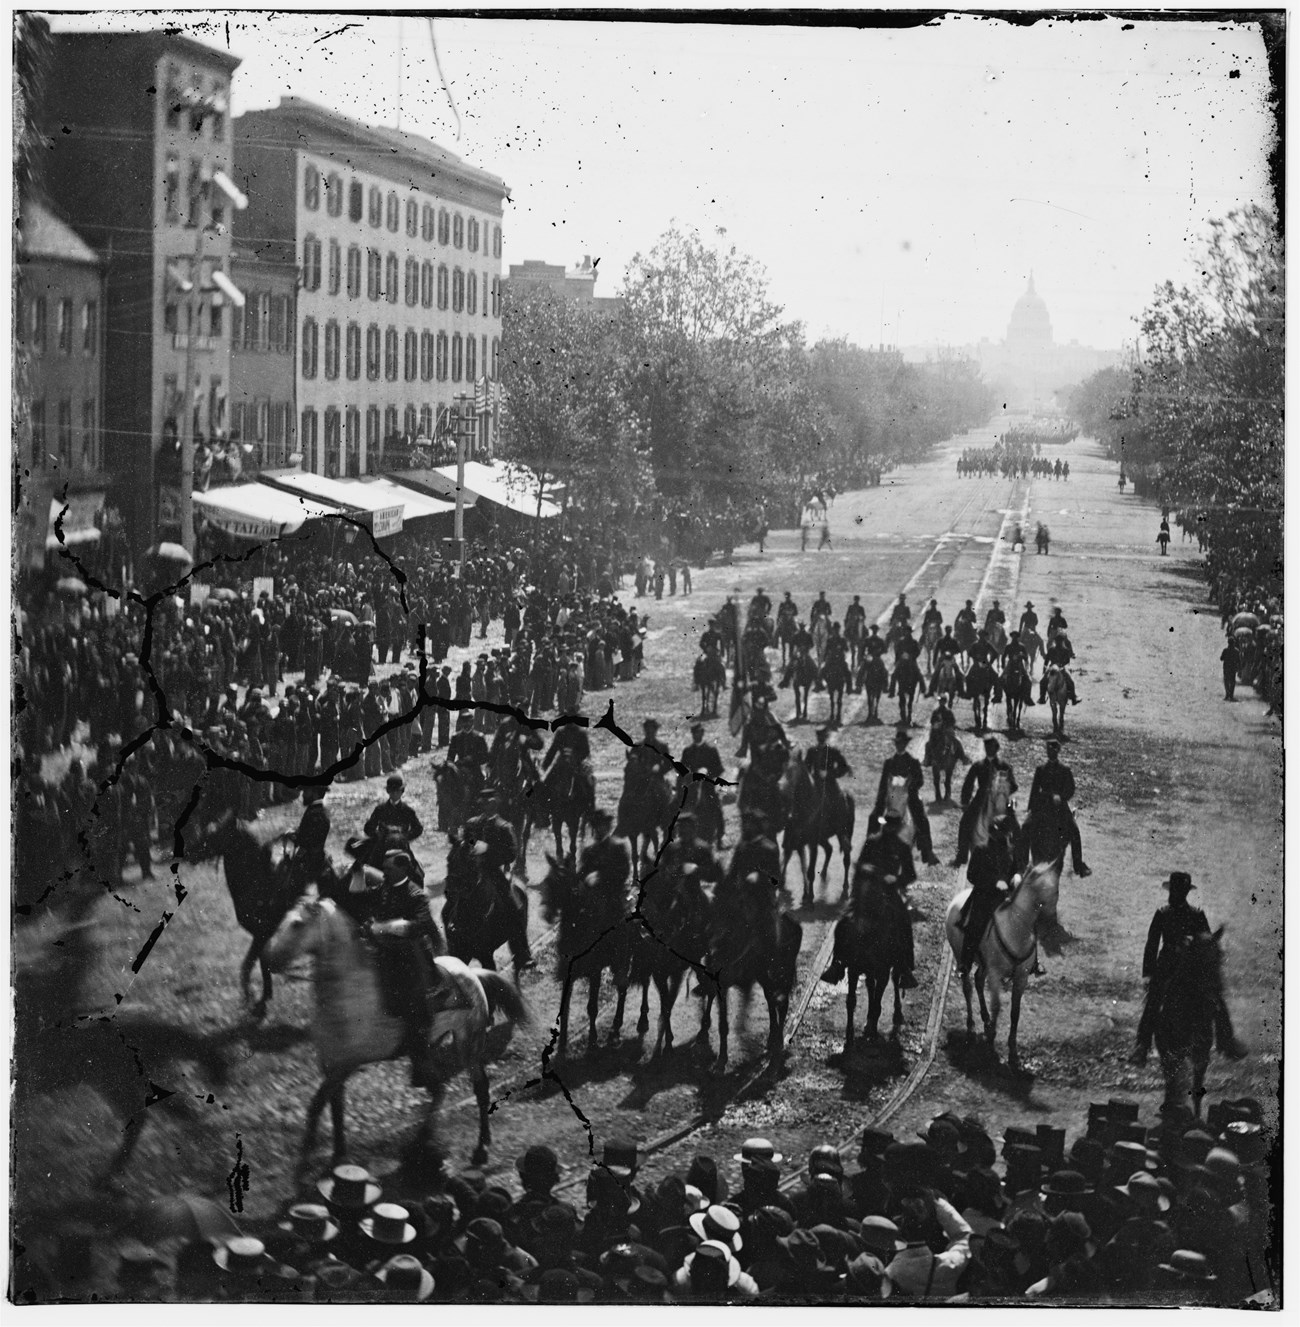 US soldiers march up Pennsylvania Avenue with spectators lining the street of Washington DC in May 1865.